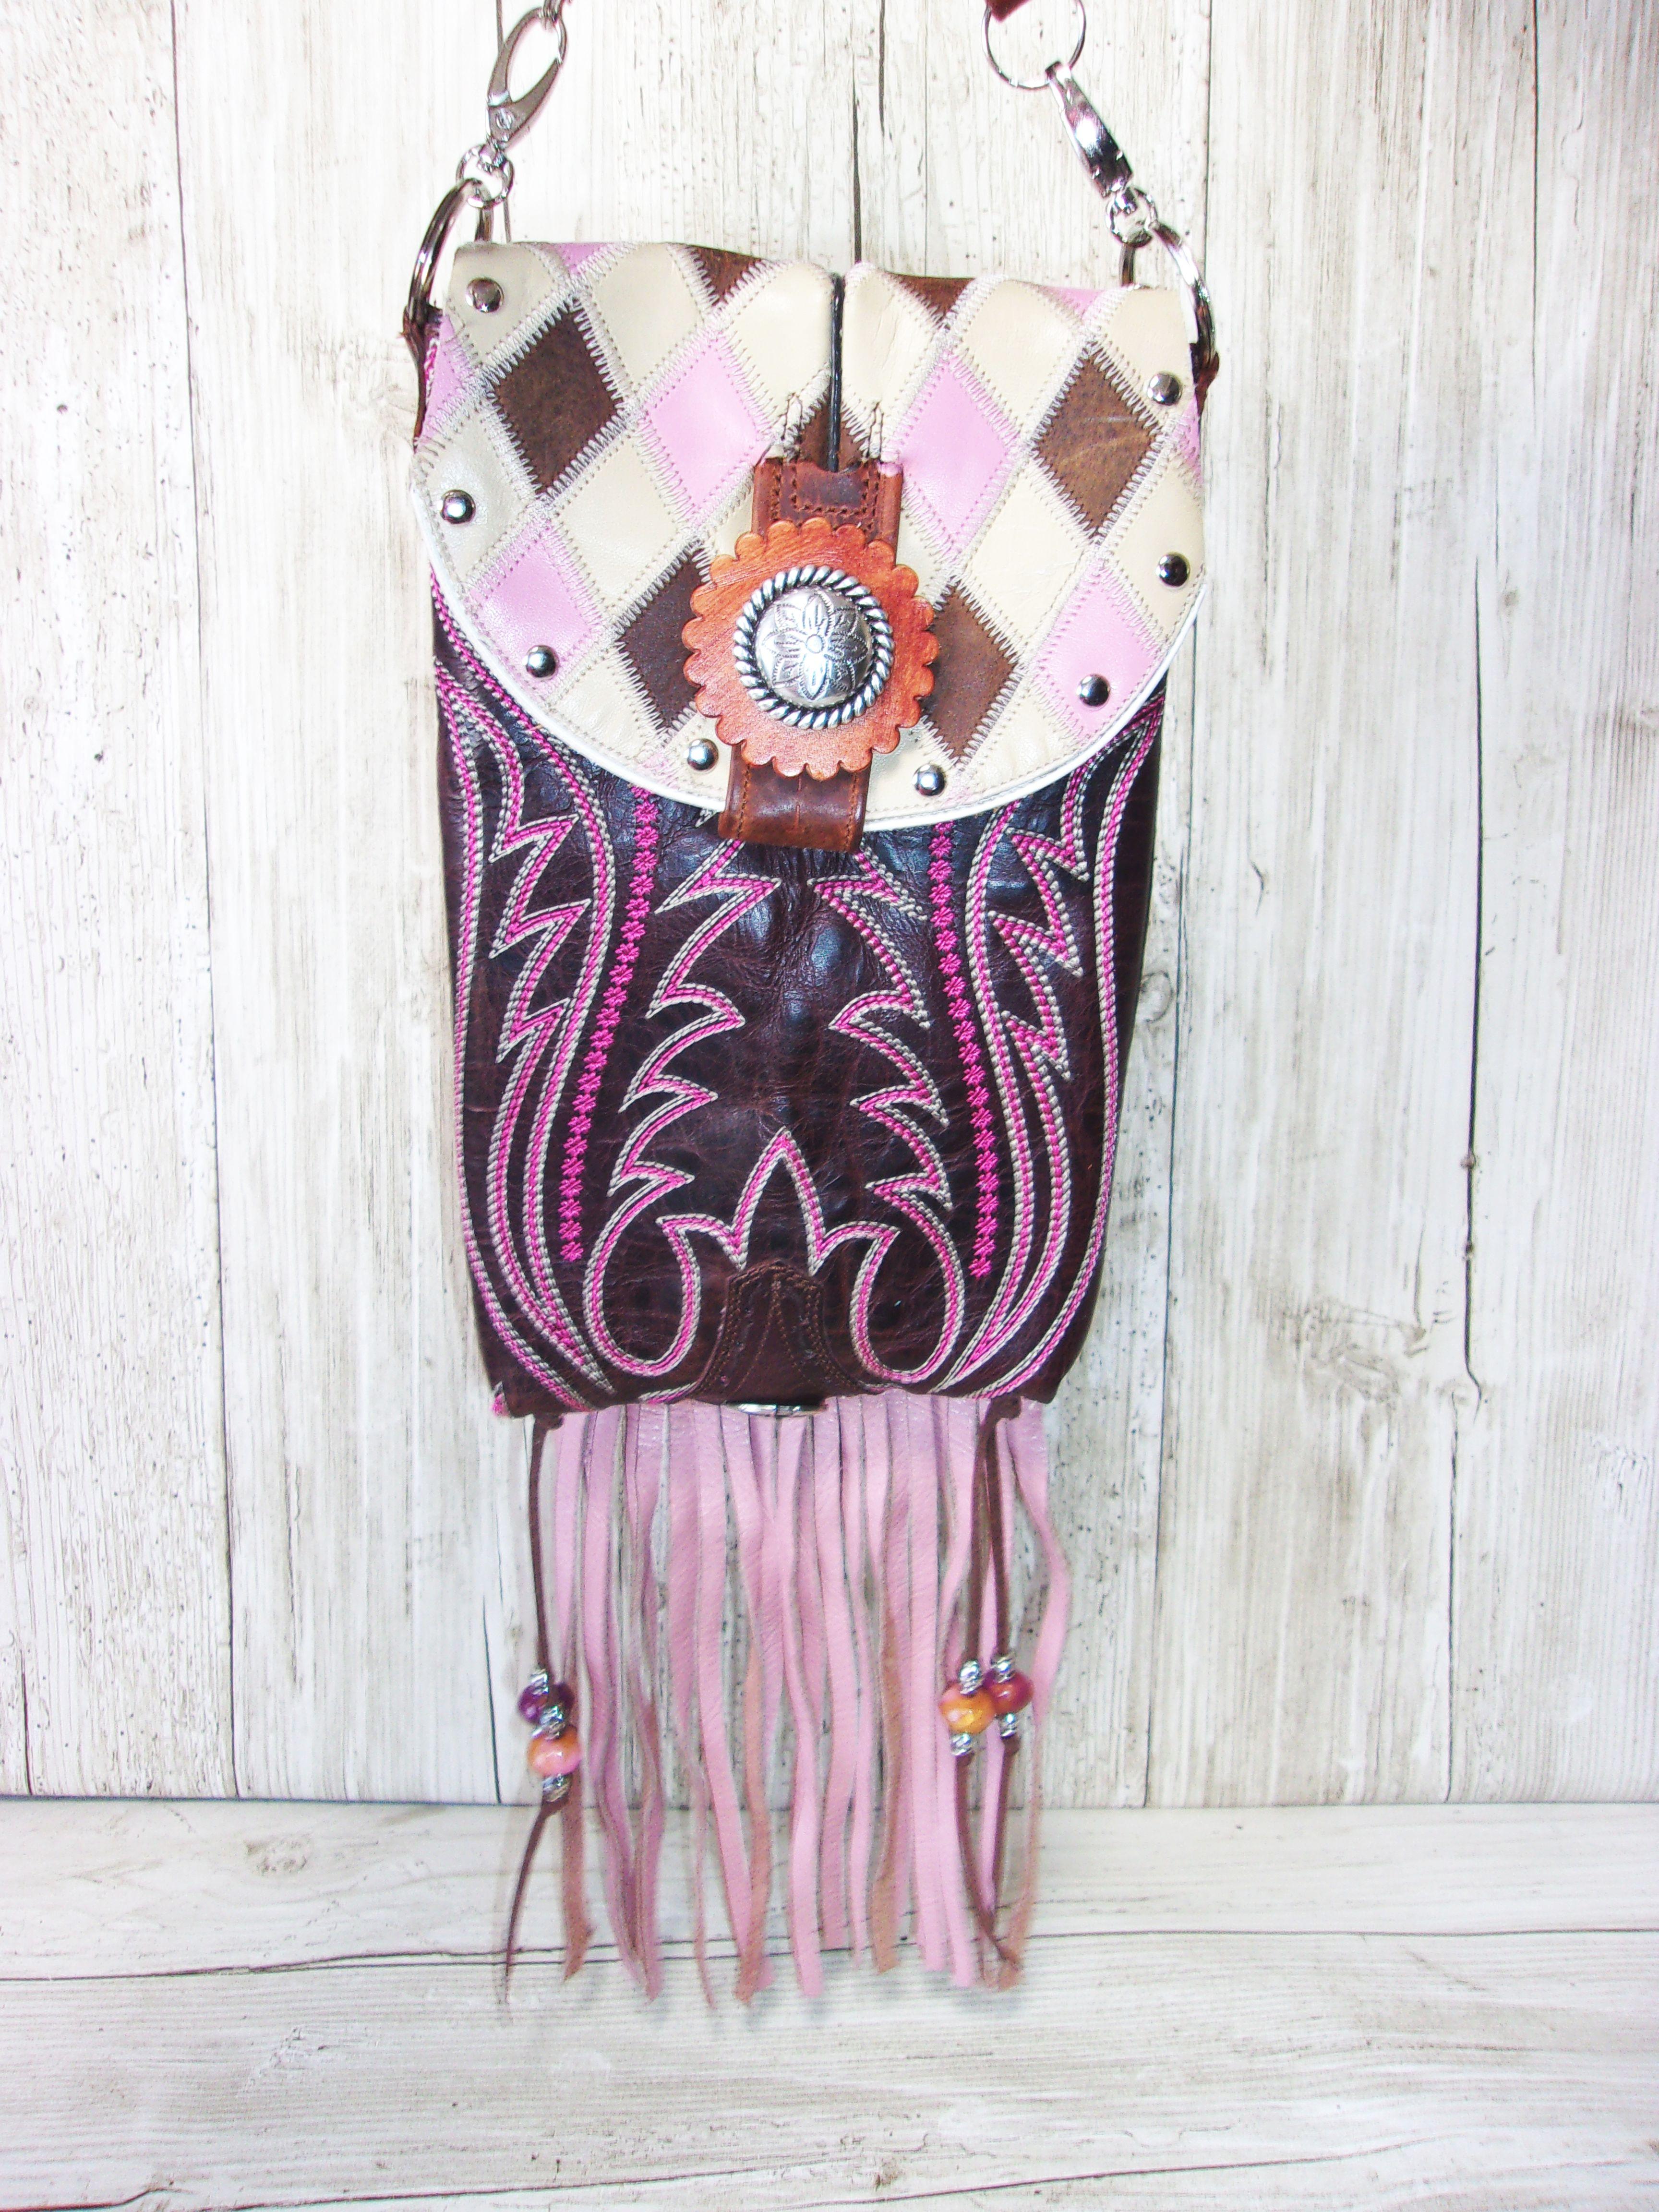 Crossbody Hipster Purse with Fringe – Cowboy Boot Purse – Western Crossbody Bag with Fringe HP813 cowboy boot purses, western fringe purse, handmade leather purses, boot purse, handmade western purse, custom leather handbags Chris Thompson Bags